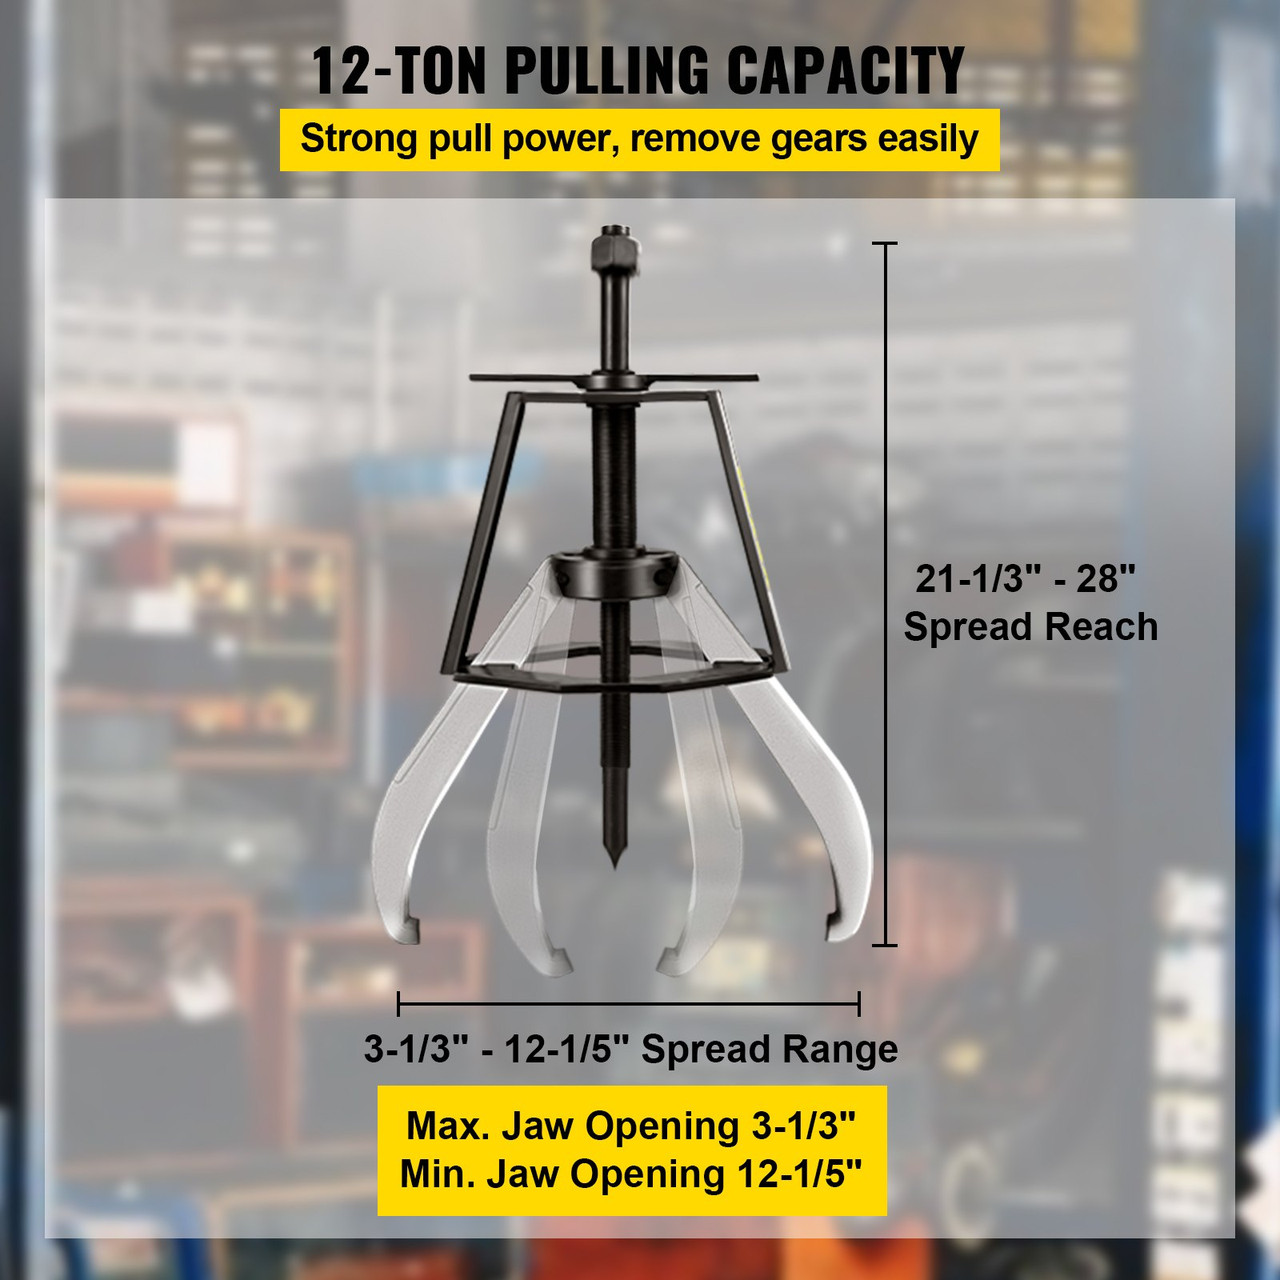 Gear Puller 2 Jaw Puller, 12 Ton/26448 LBS Capacity Manual Puller, 21-1/3"-28" Spread Reach and 3-1/3" -12-1/5" Spread Range, 20" Overall Length Gear Removal Tools For Slide Gears, Pulleys